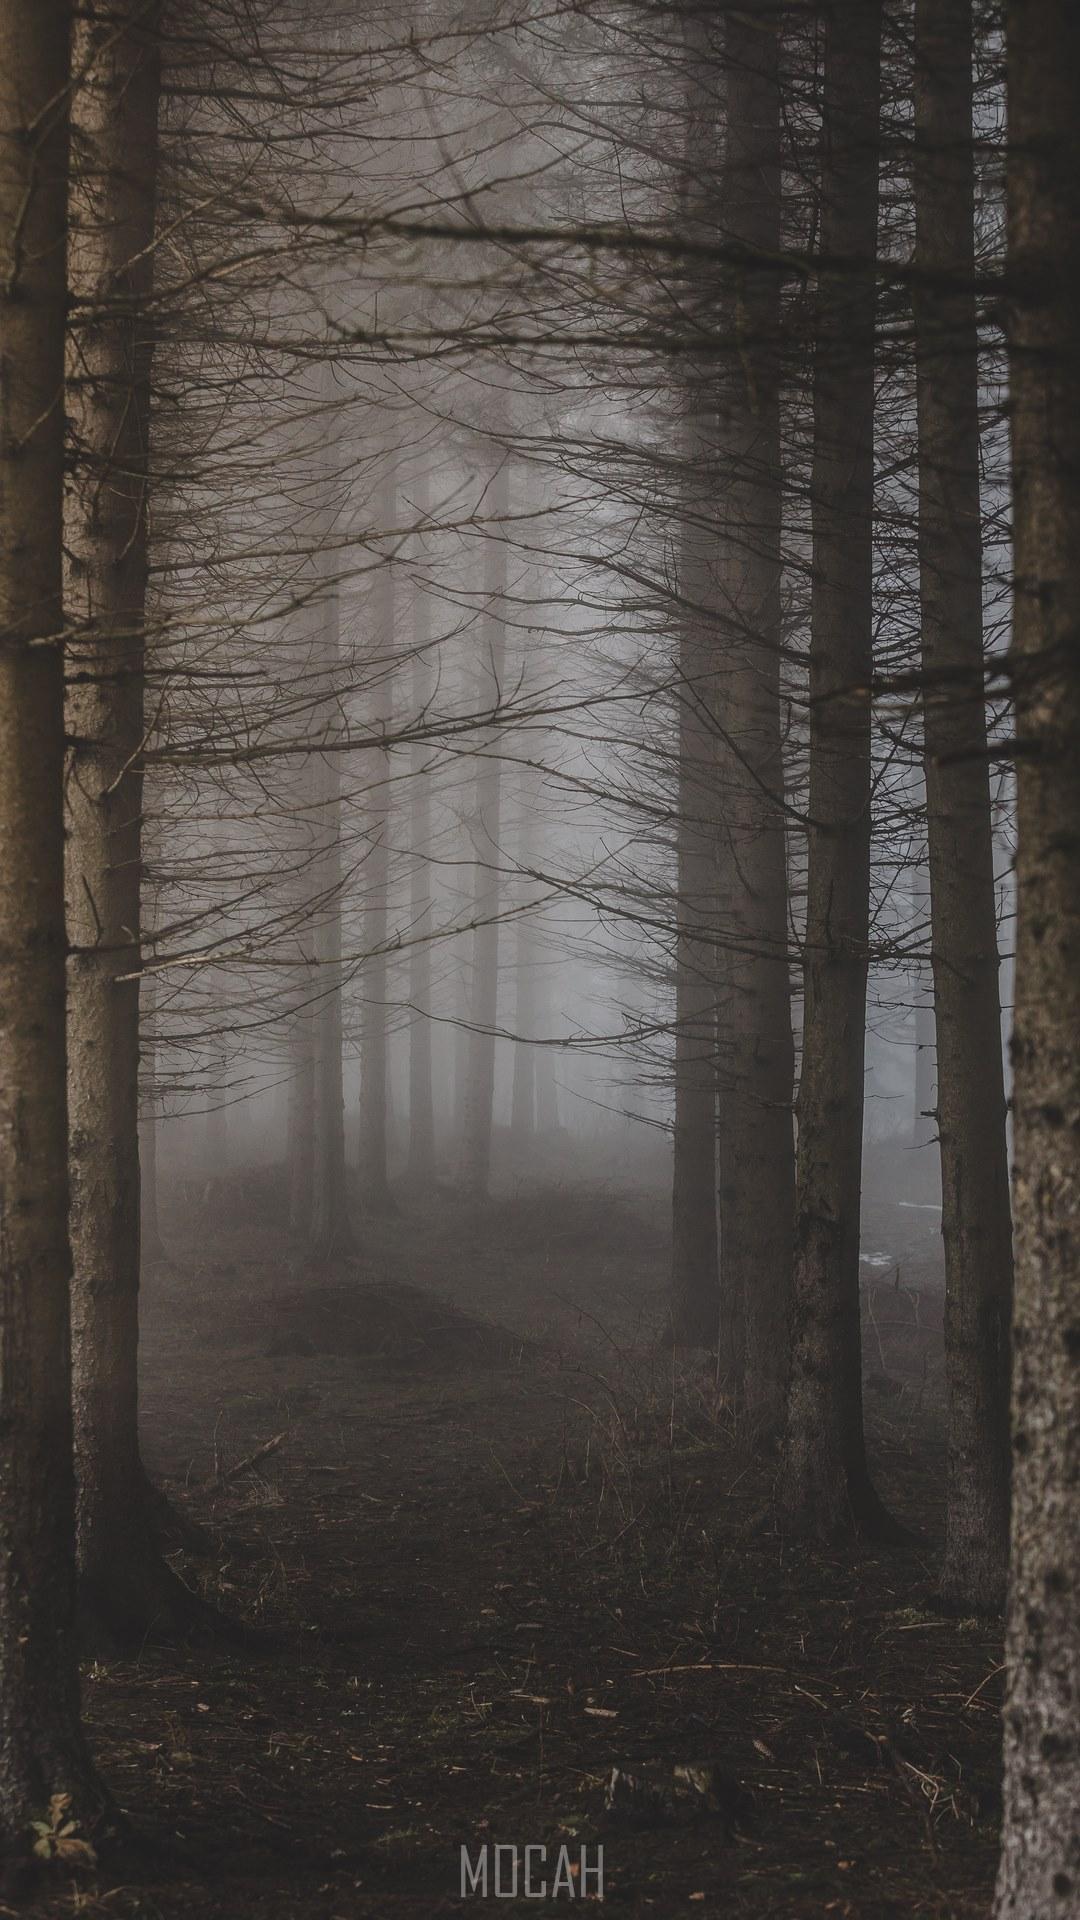 HD wallpaper, Fables And Fairy Tales, 1080X1920, A Pale Shot Of A Misty Forest Path, Nokia 6 2018 Wallpaper Full Hd